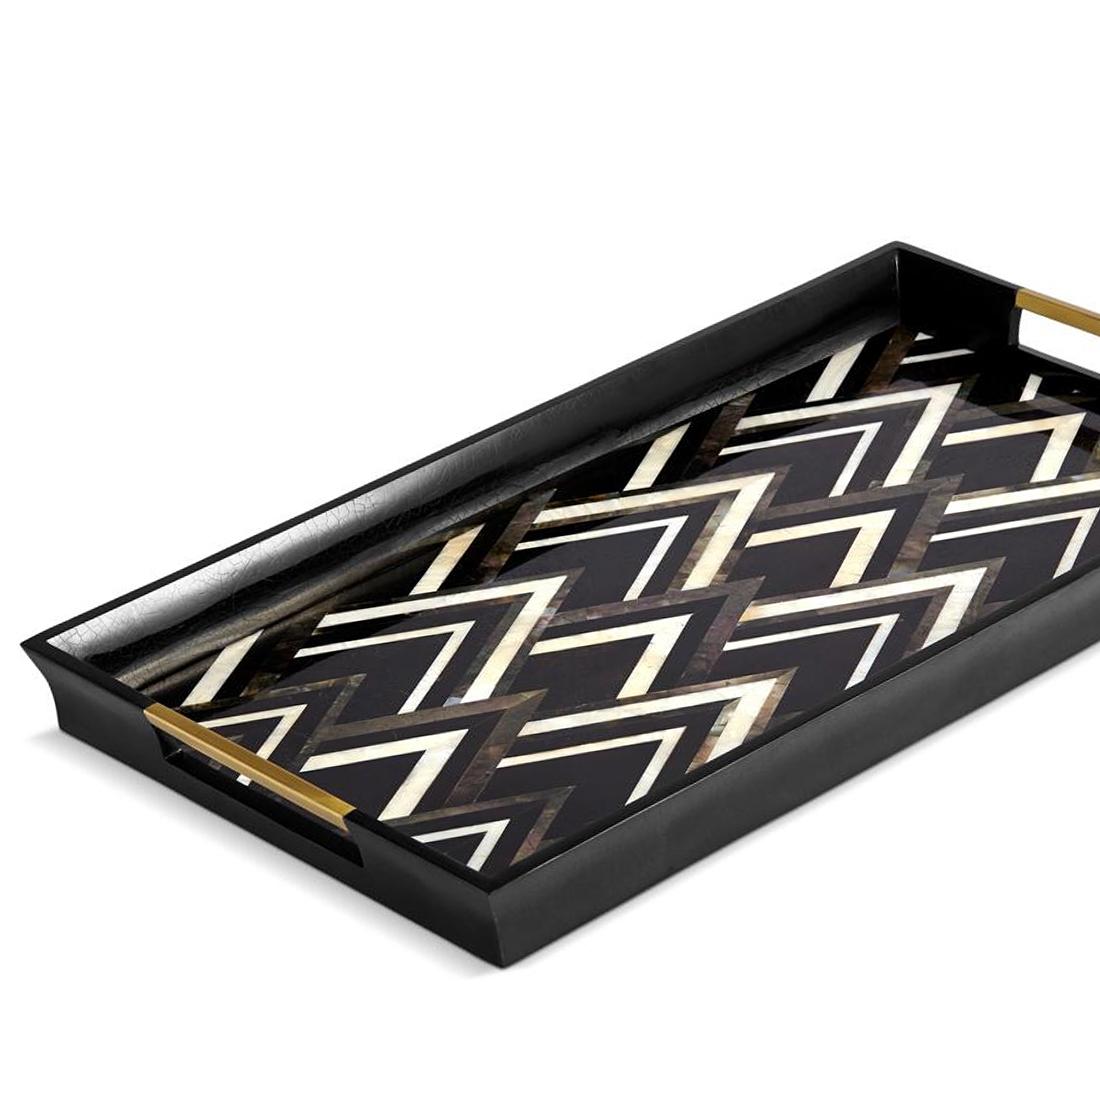 Tray ortal all with natural shells, with grey,
white and black natural shells. With brass handles.
Subtle piece with luxury gift box included.